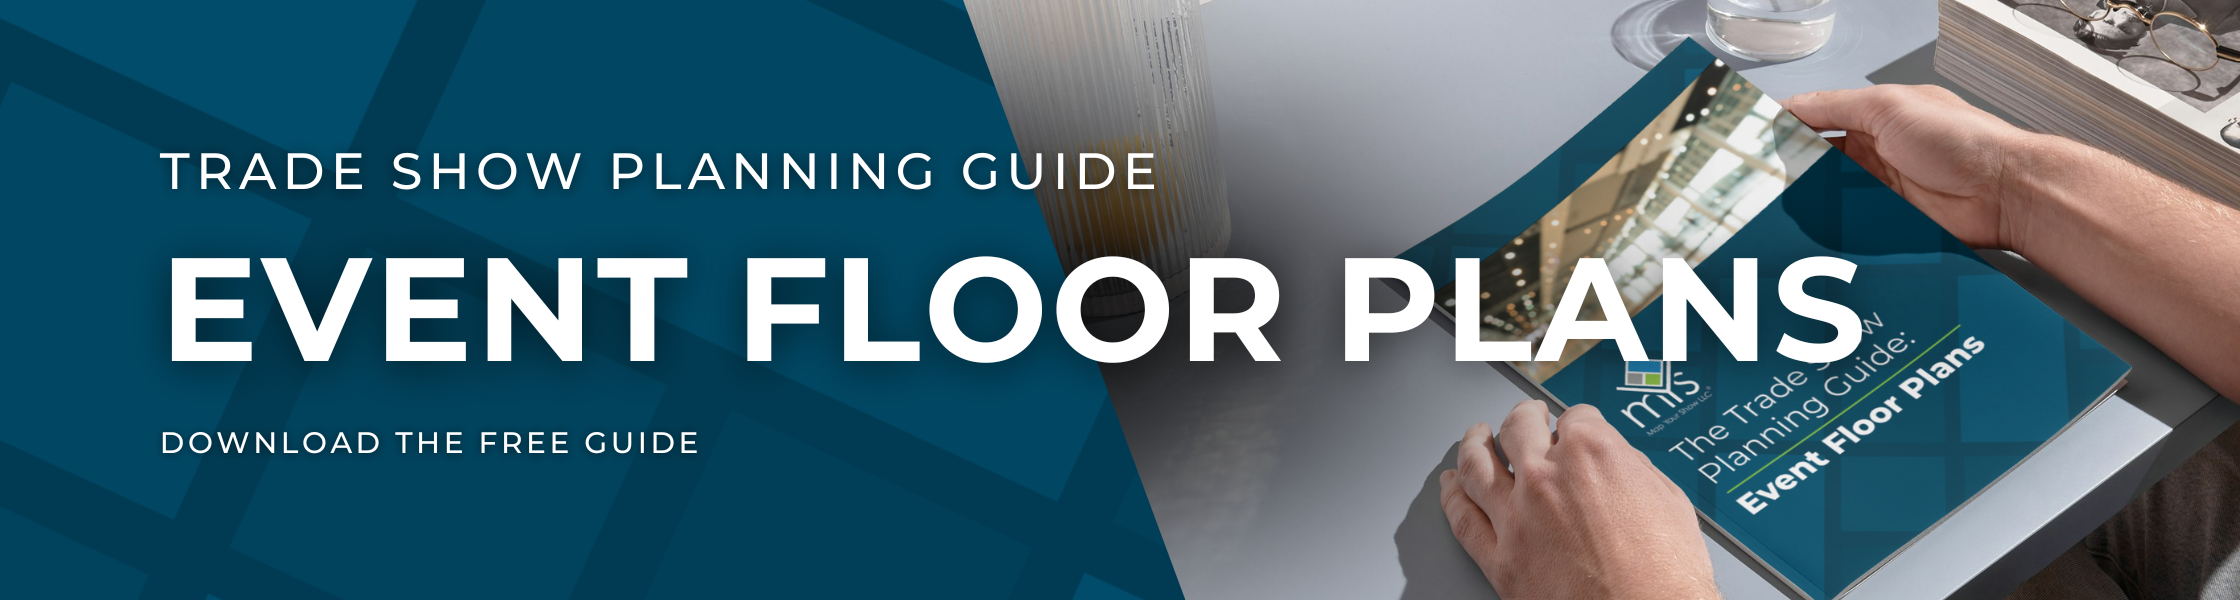 Map Your Show Trade Show Planning Guide for Event Floor Plans. Download the free guide.